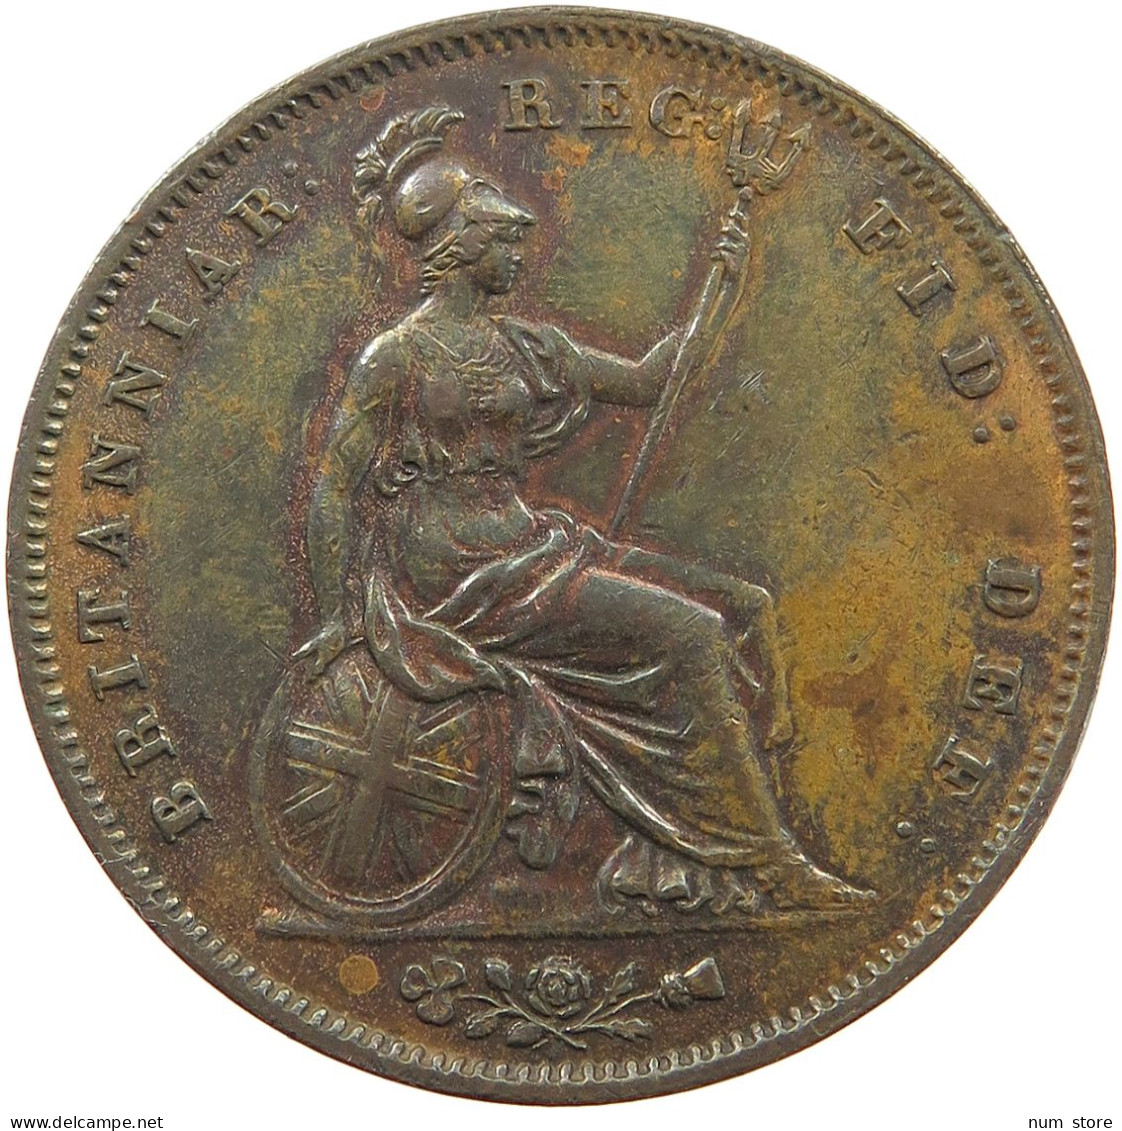 GREAT BRITAIN PENNY 1853 Victoria 1837-1901 #t120 0375 - D. 1 Penny